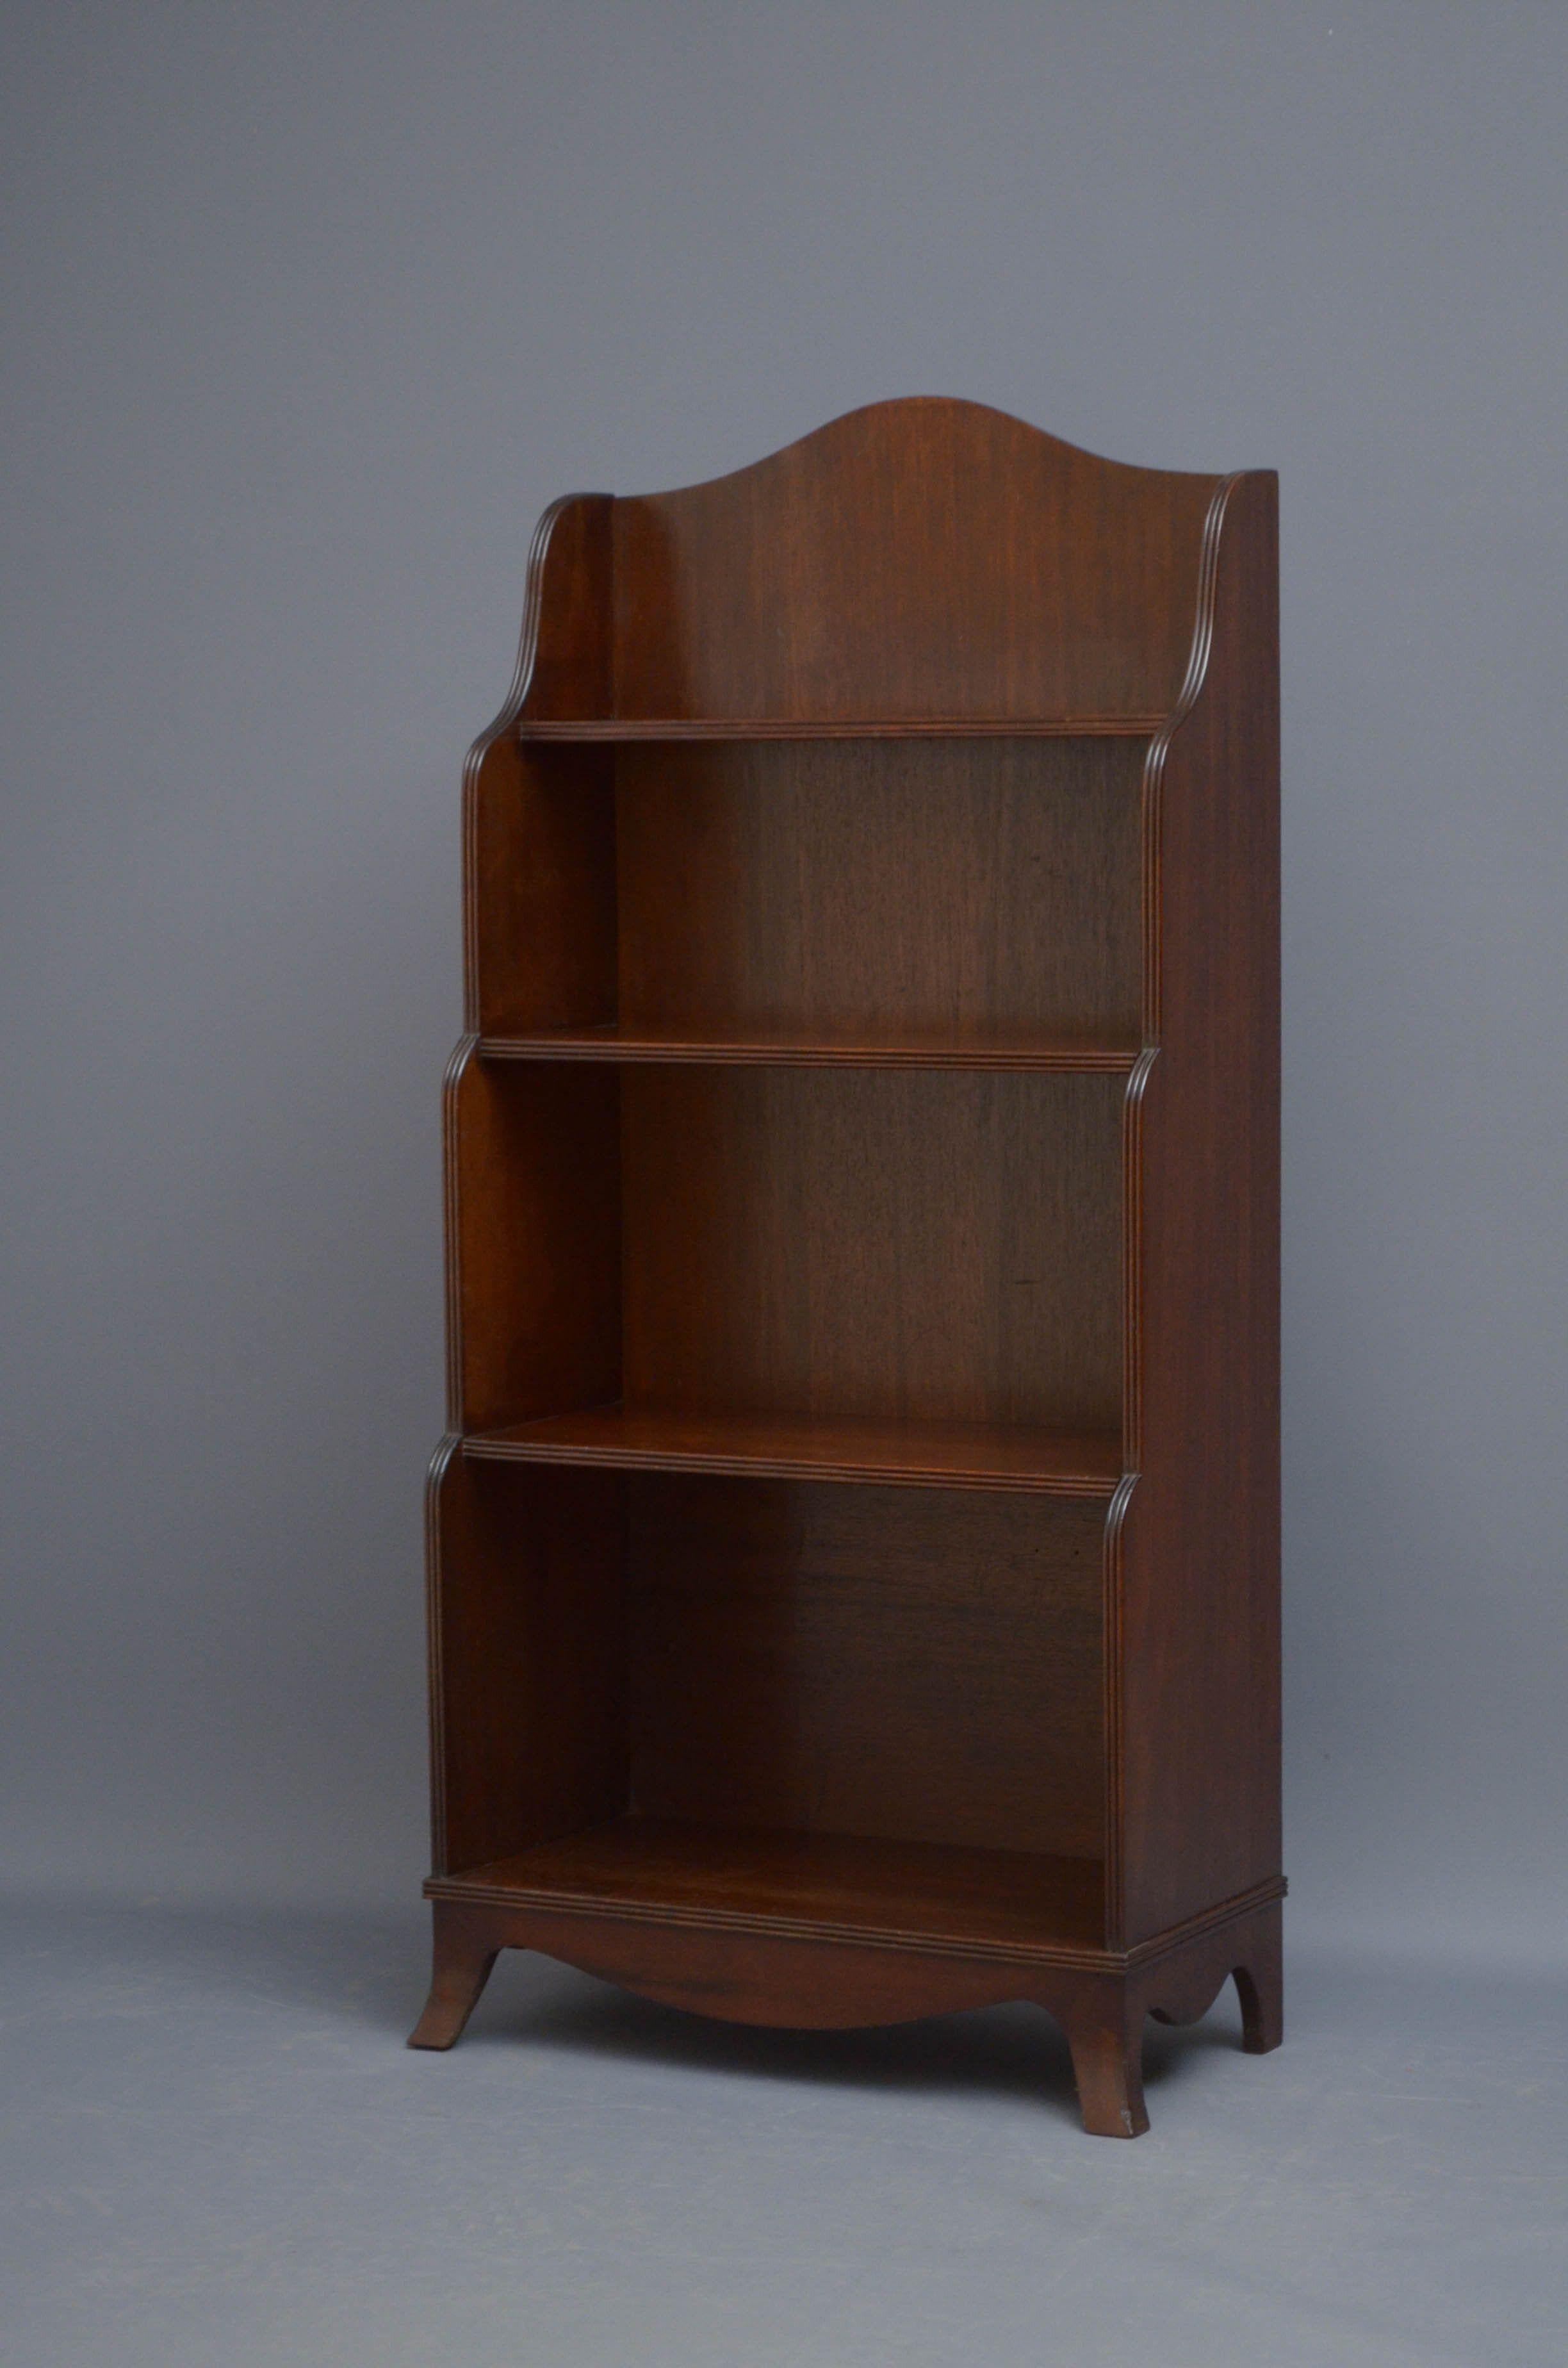 Sn5231 A solid mahogany early XIXth century waterfall bookcase with reeded decoration to the shelf fronts and sides, standing on splayed feed united by shaped apron. This antique bookcase retains its original wax finish, patina and soft colour, all